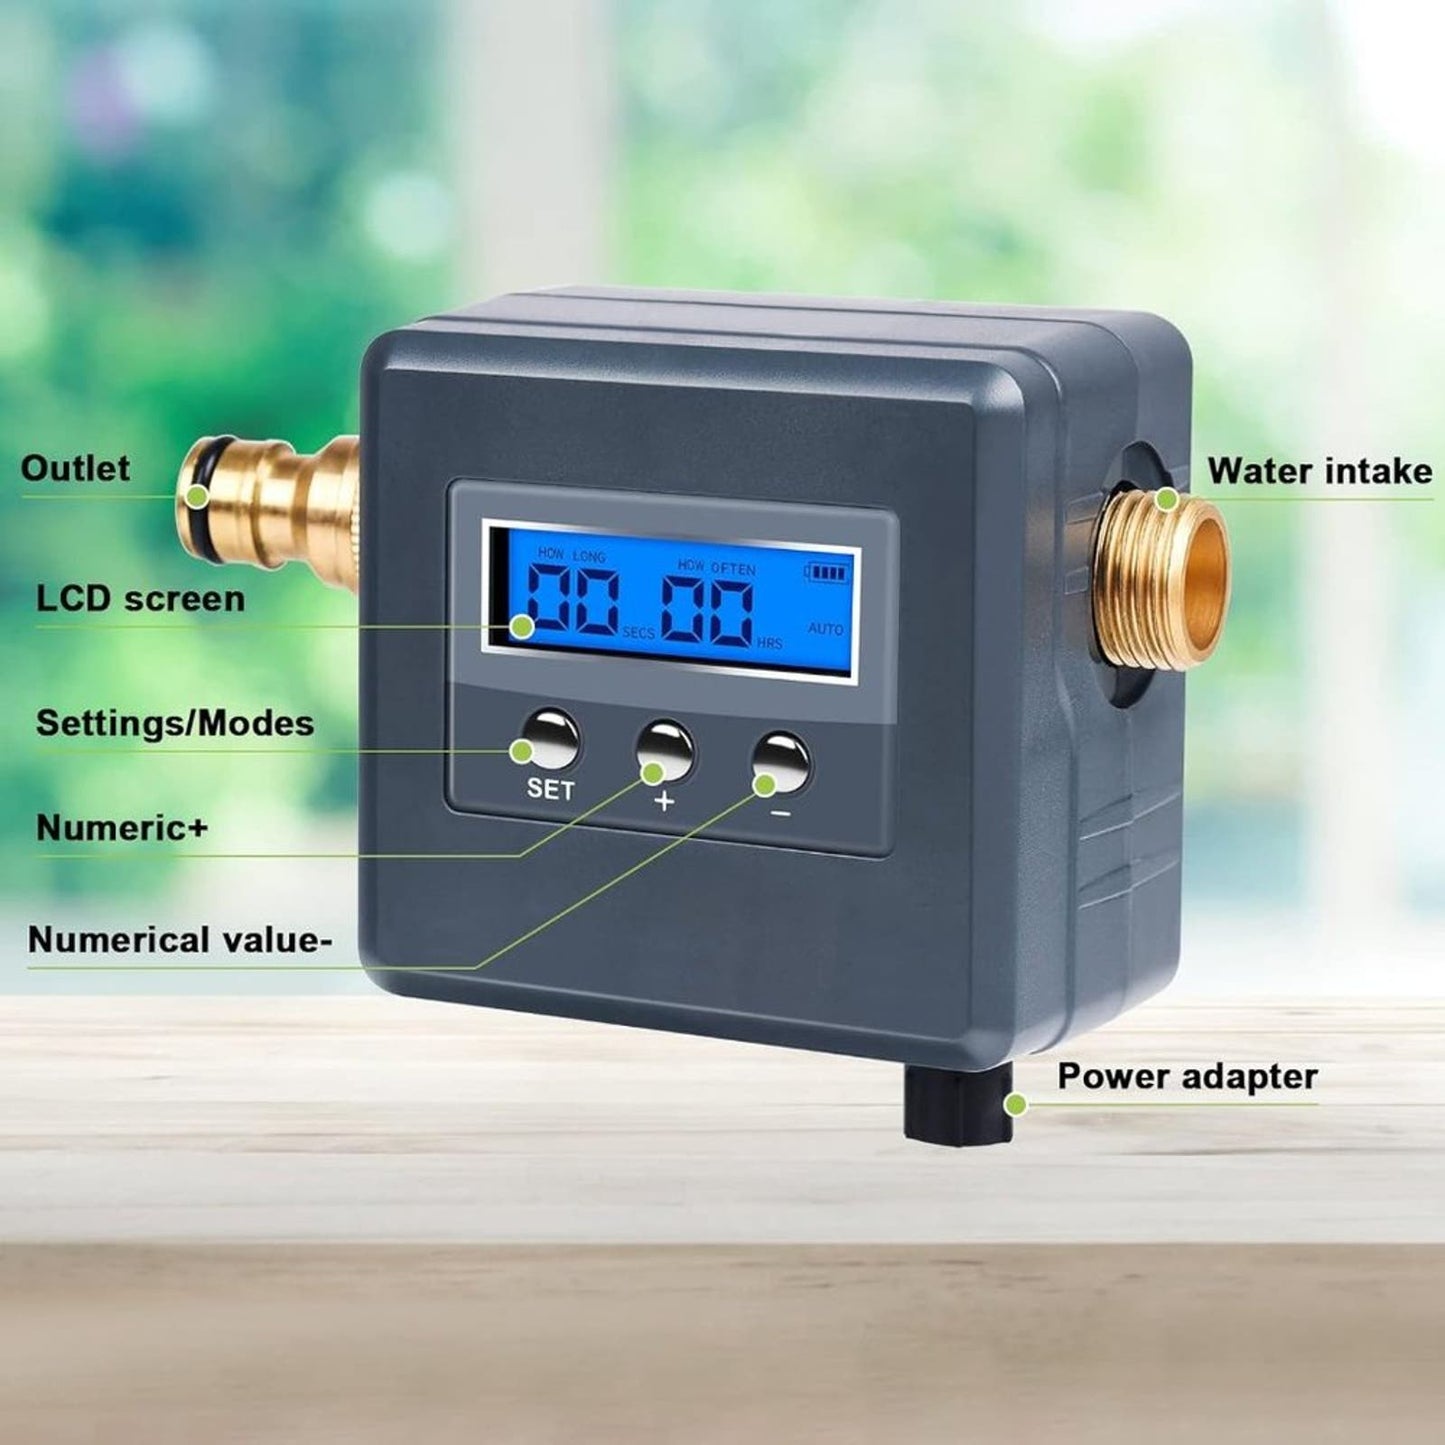 DAOTAILI Sprinkler Timer,Hose Timer with Timing and Frequency Irrigation Garden